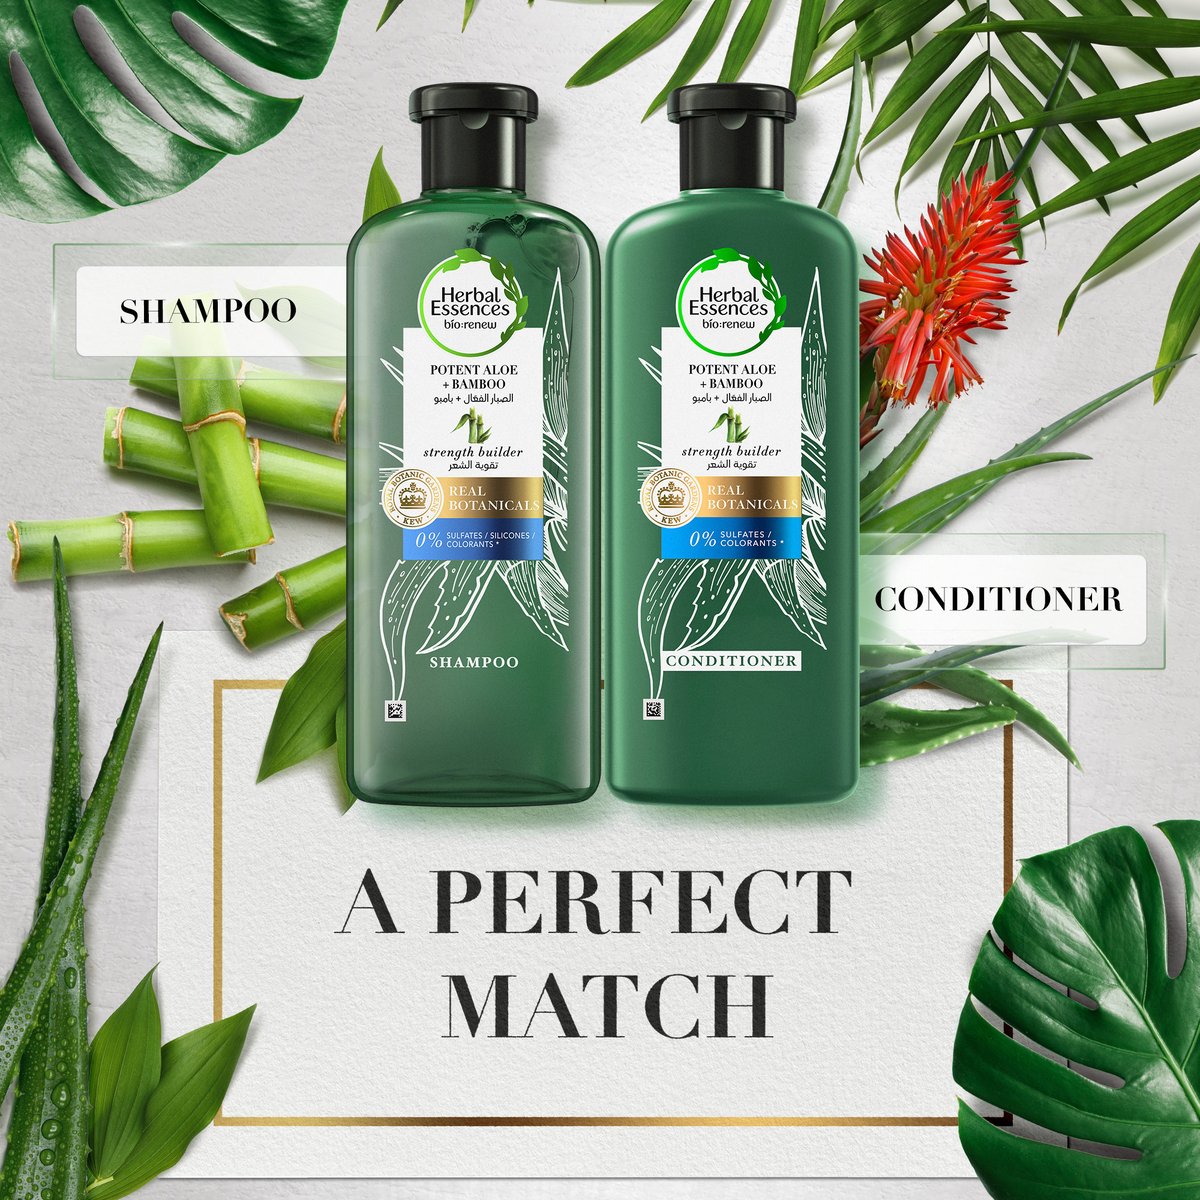 Herbal Essences Hair Strengthening Sulfate Free Potent Aloe Vera + Bamboo Natural Shampoo for Dry Hair 400ml